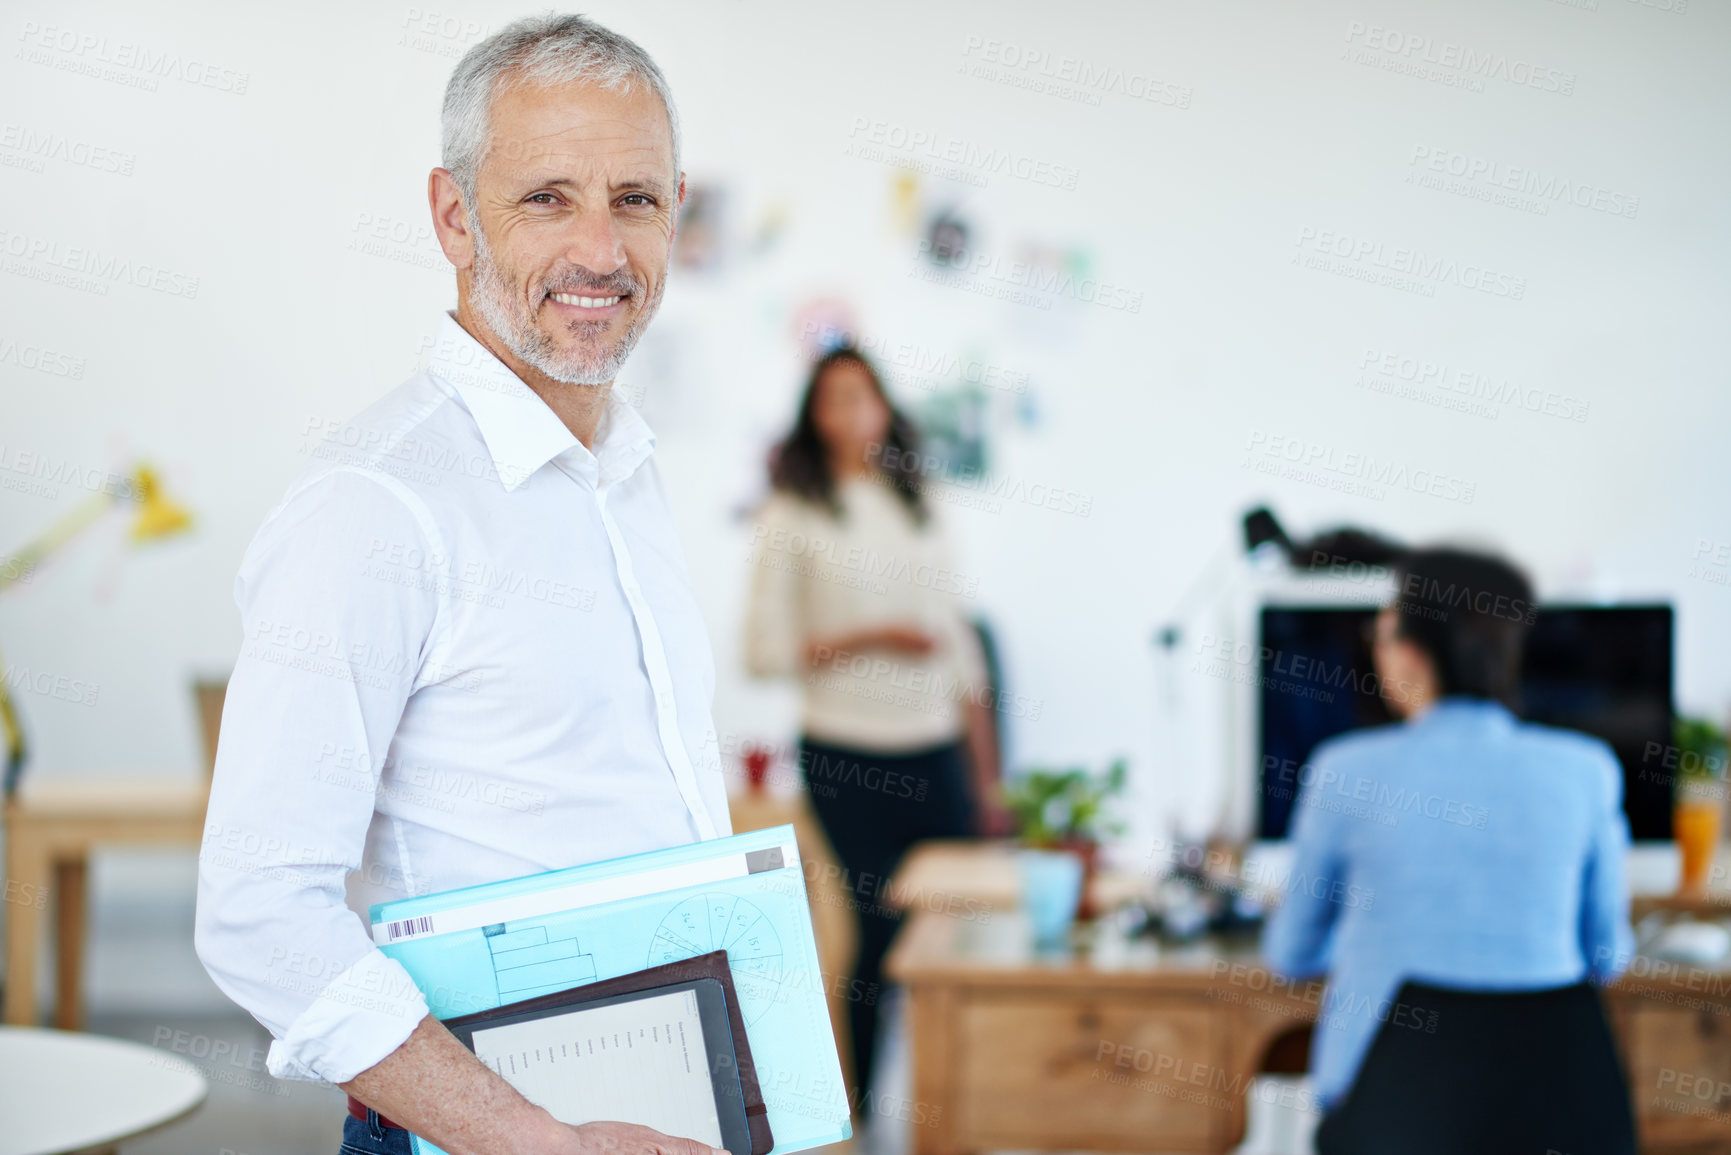 Buy stock photo Portrait of a mature businessman standing in an office